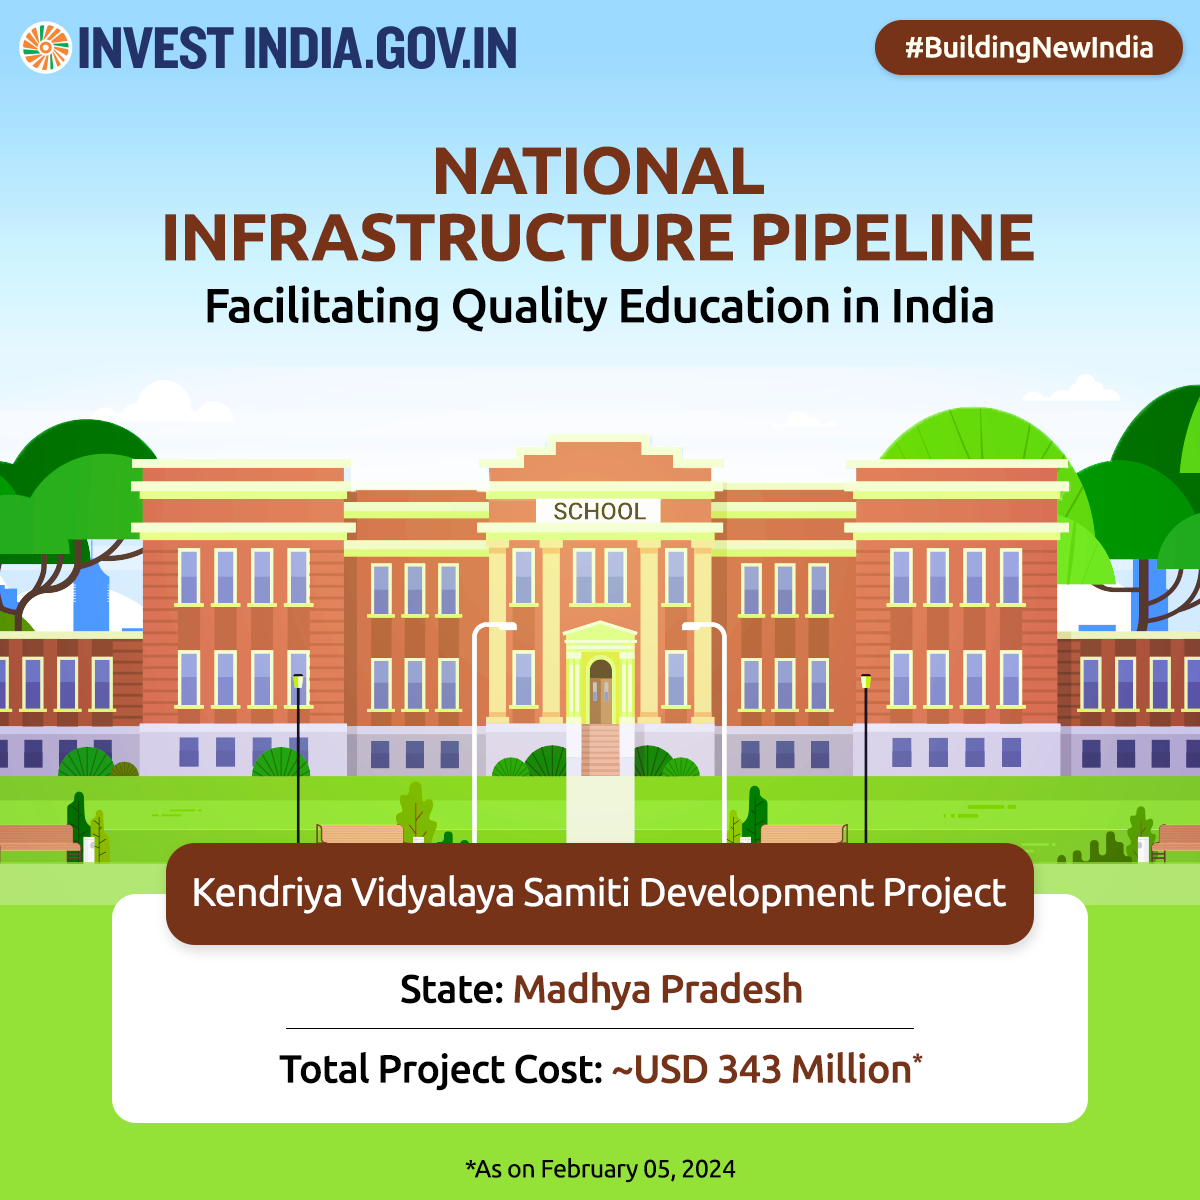 Under #NIP, this project focuses on the nationwide expansion of Kendriya Vidyalaya Sangathan (KVS) schools & offices, promoting widespread access to educational facilities in #MadhyaPradesh.  

Know more: bit.ly/page_NIP

#BuildingNewIndia #NationalInfrastructurePipeline